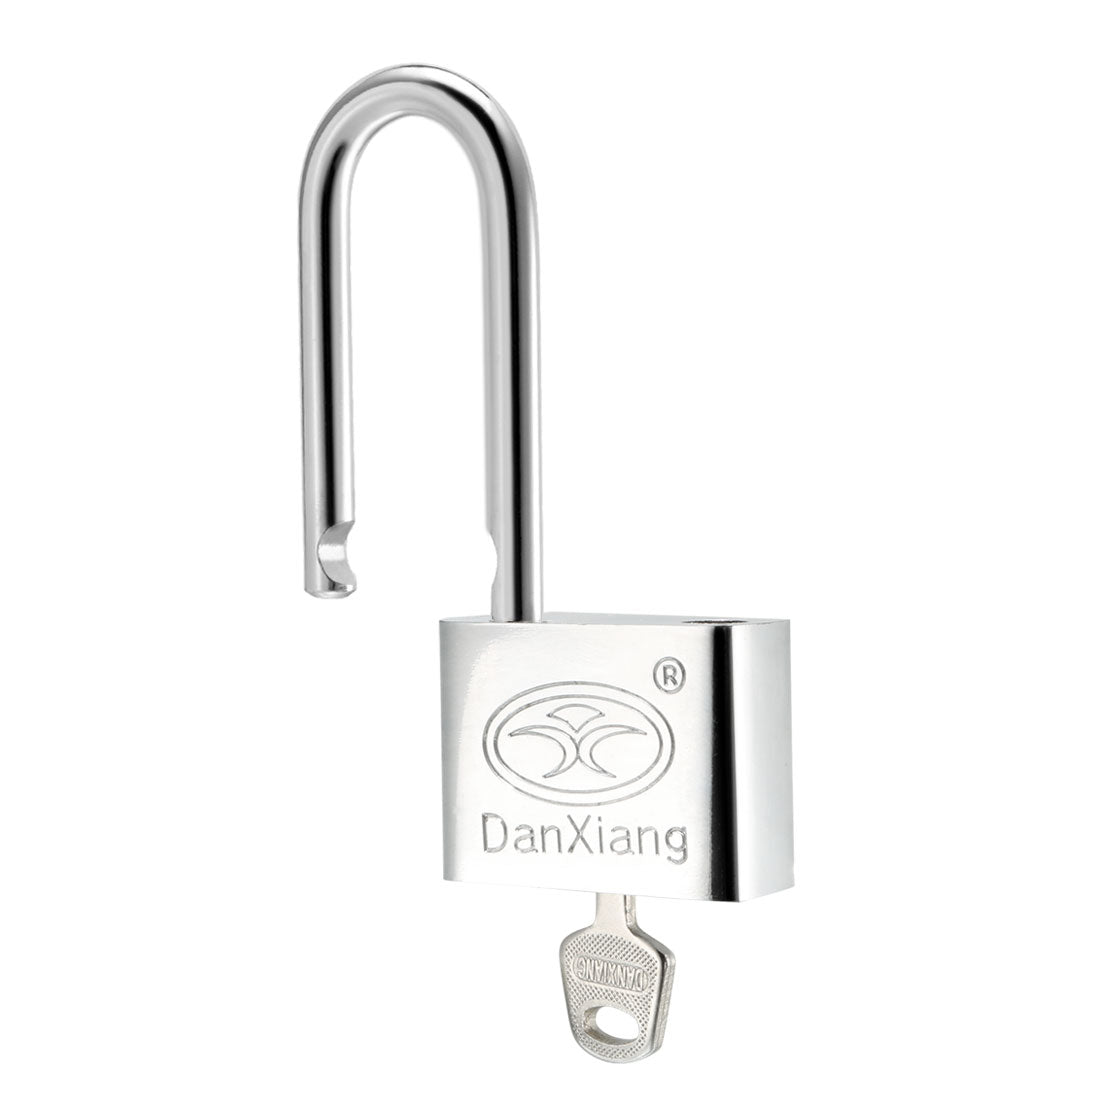 uxcell Uxcell 50mm Body Wide Stainless Steel Padlock Chrome Finish Harden Long Shackle, Keyed Different